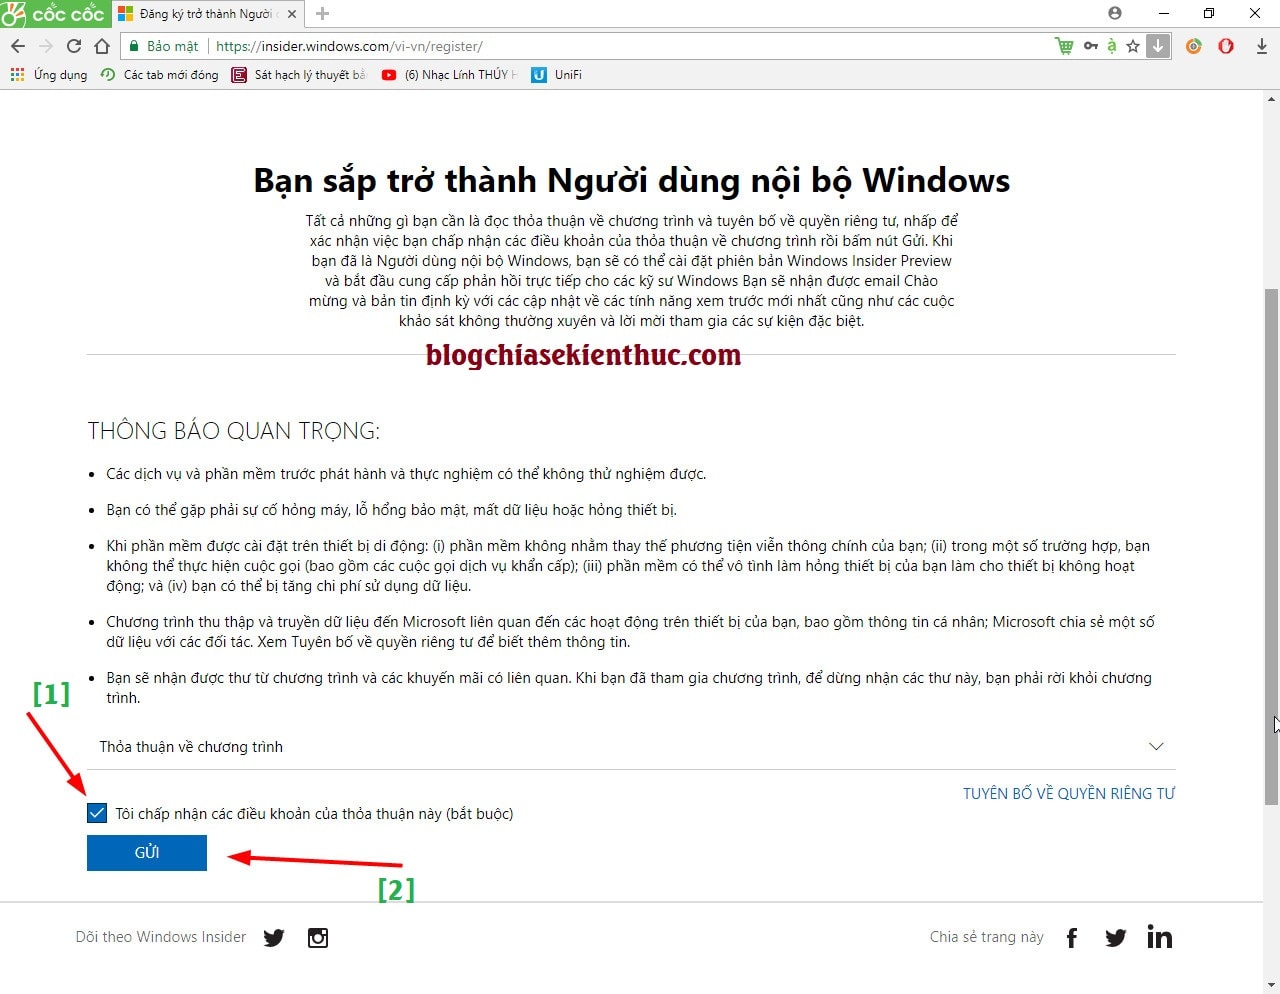 cach-dang-ky-thanh-vien-Windows-Insider (1)